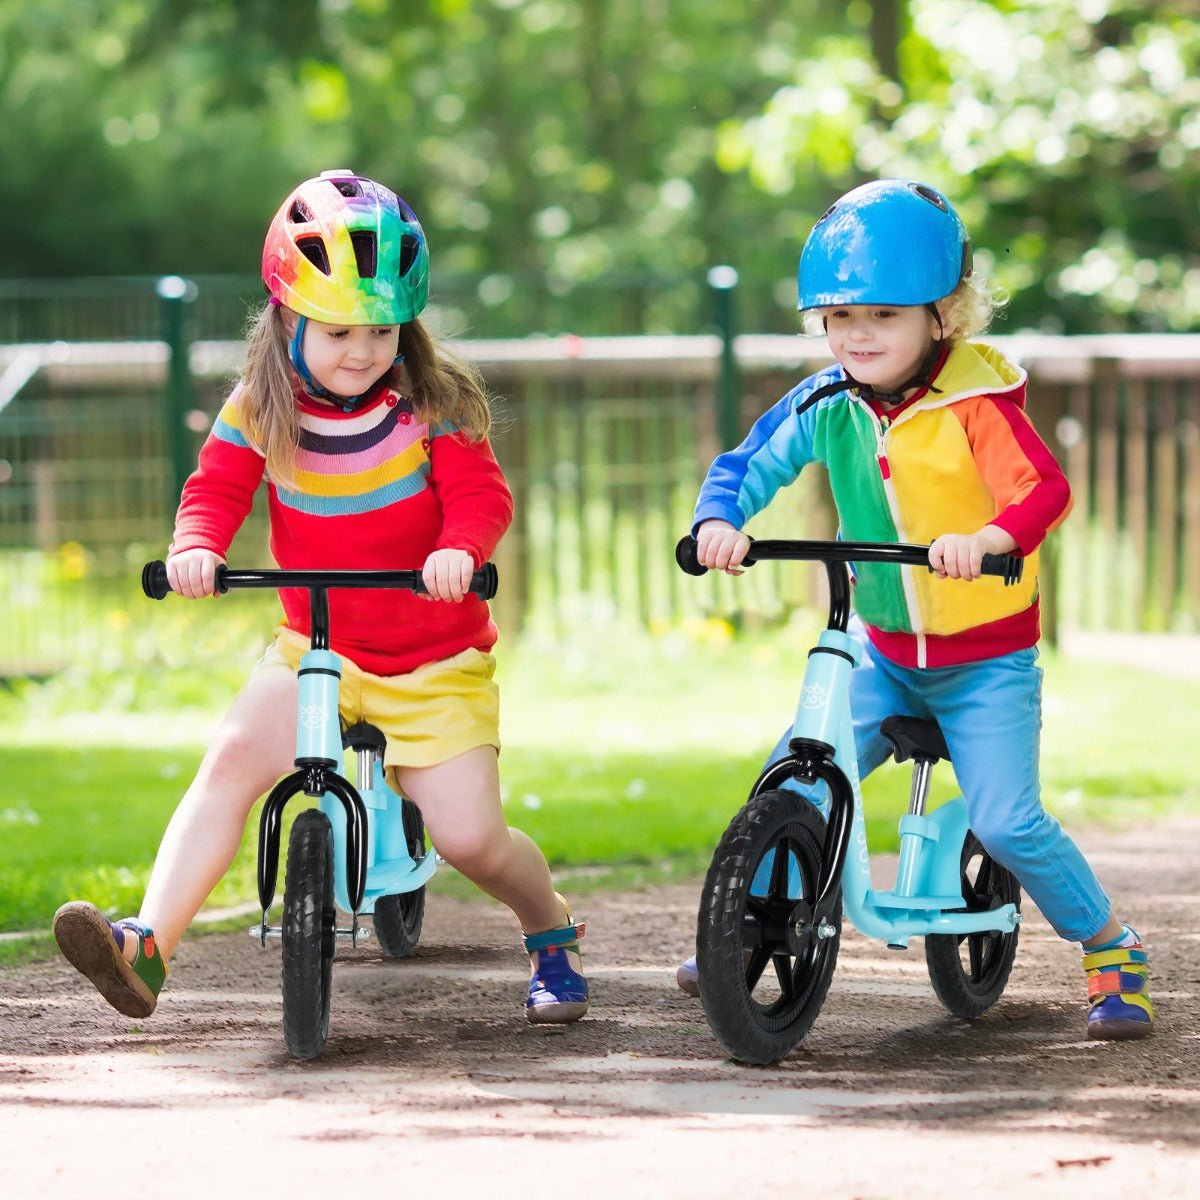 Empowering Young Riders: Blue Balance Bike with Adjustable Features for Kids